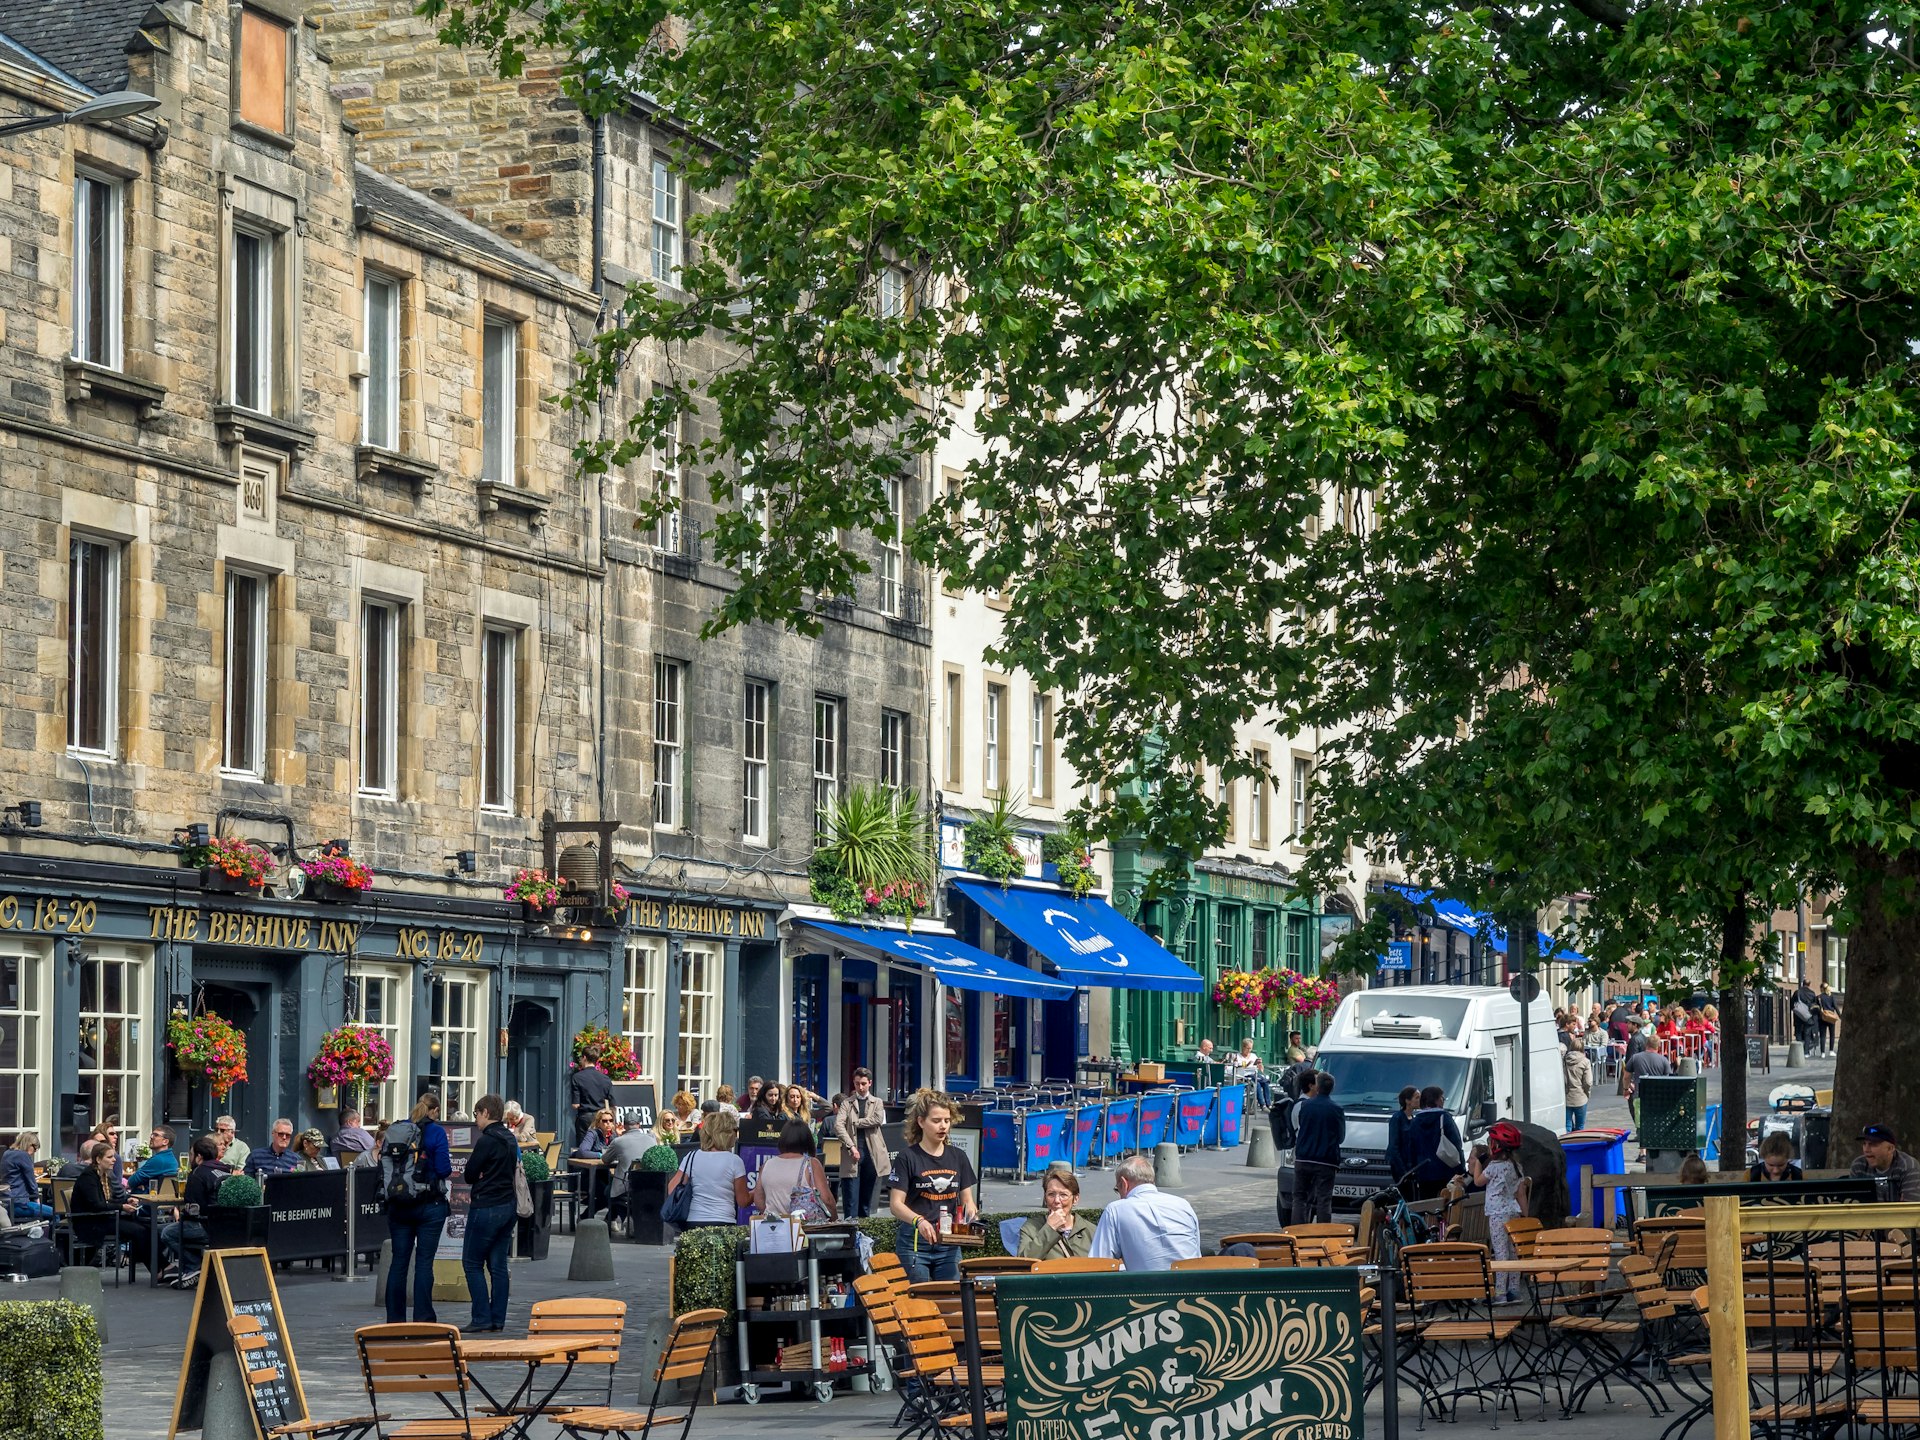 Outdoor seating at cafes and restaurants in the Grassmarket area of the Old Town, Edinburgh